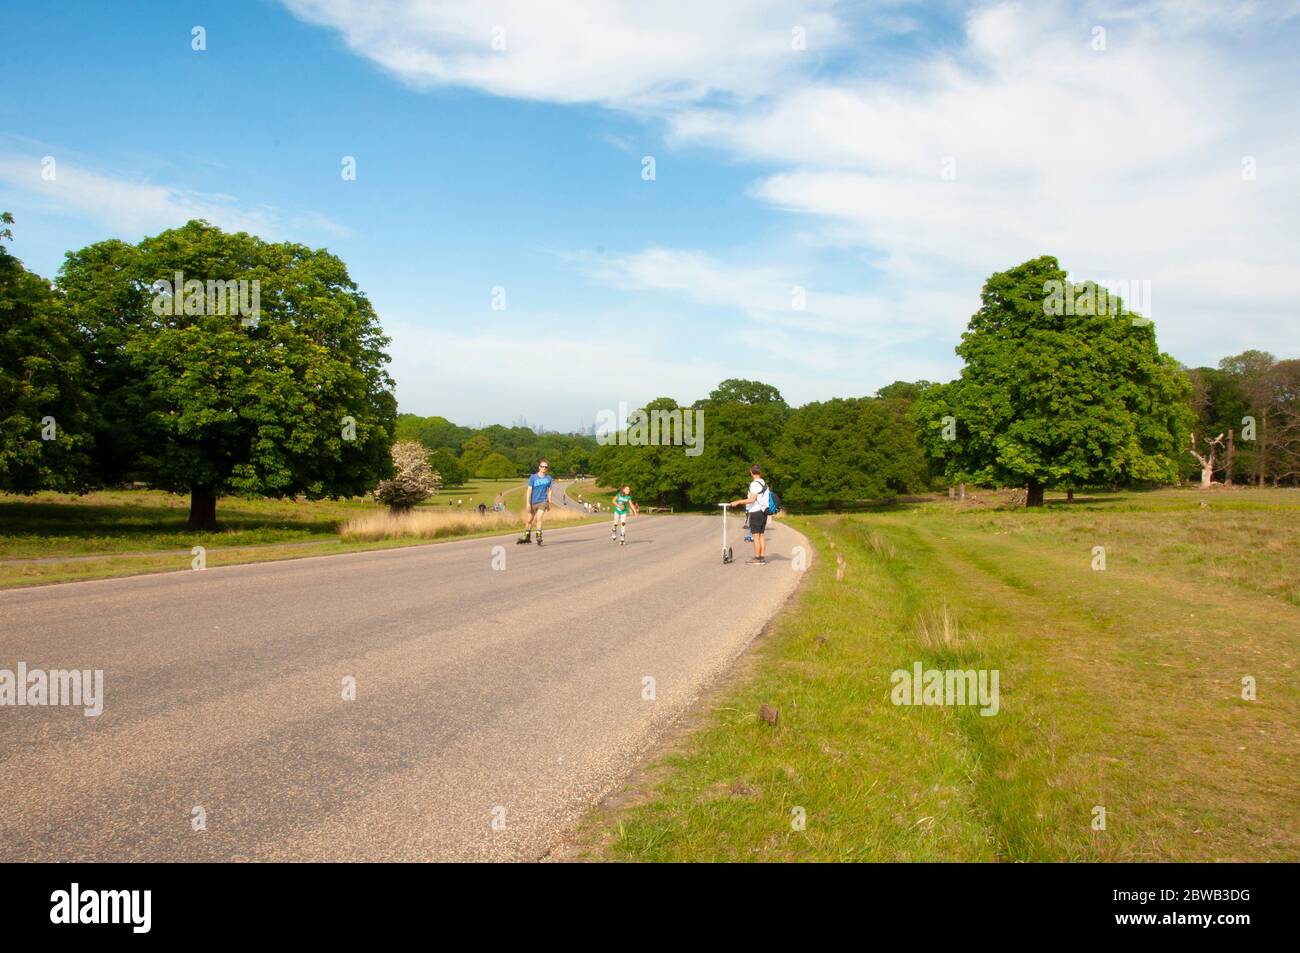 A traffic-free Richmond Park (London, UK) on a sunny day during lockdown caused my the Coronavirus pandemic. Stock Photo